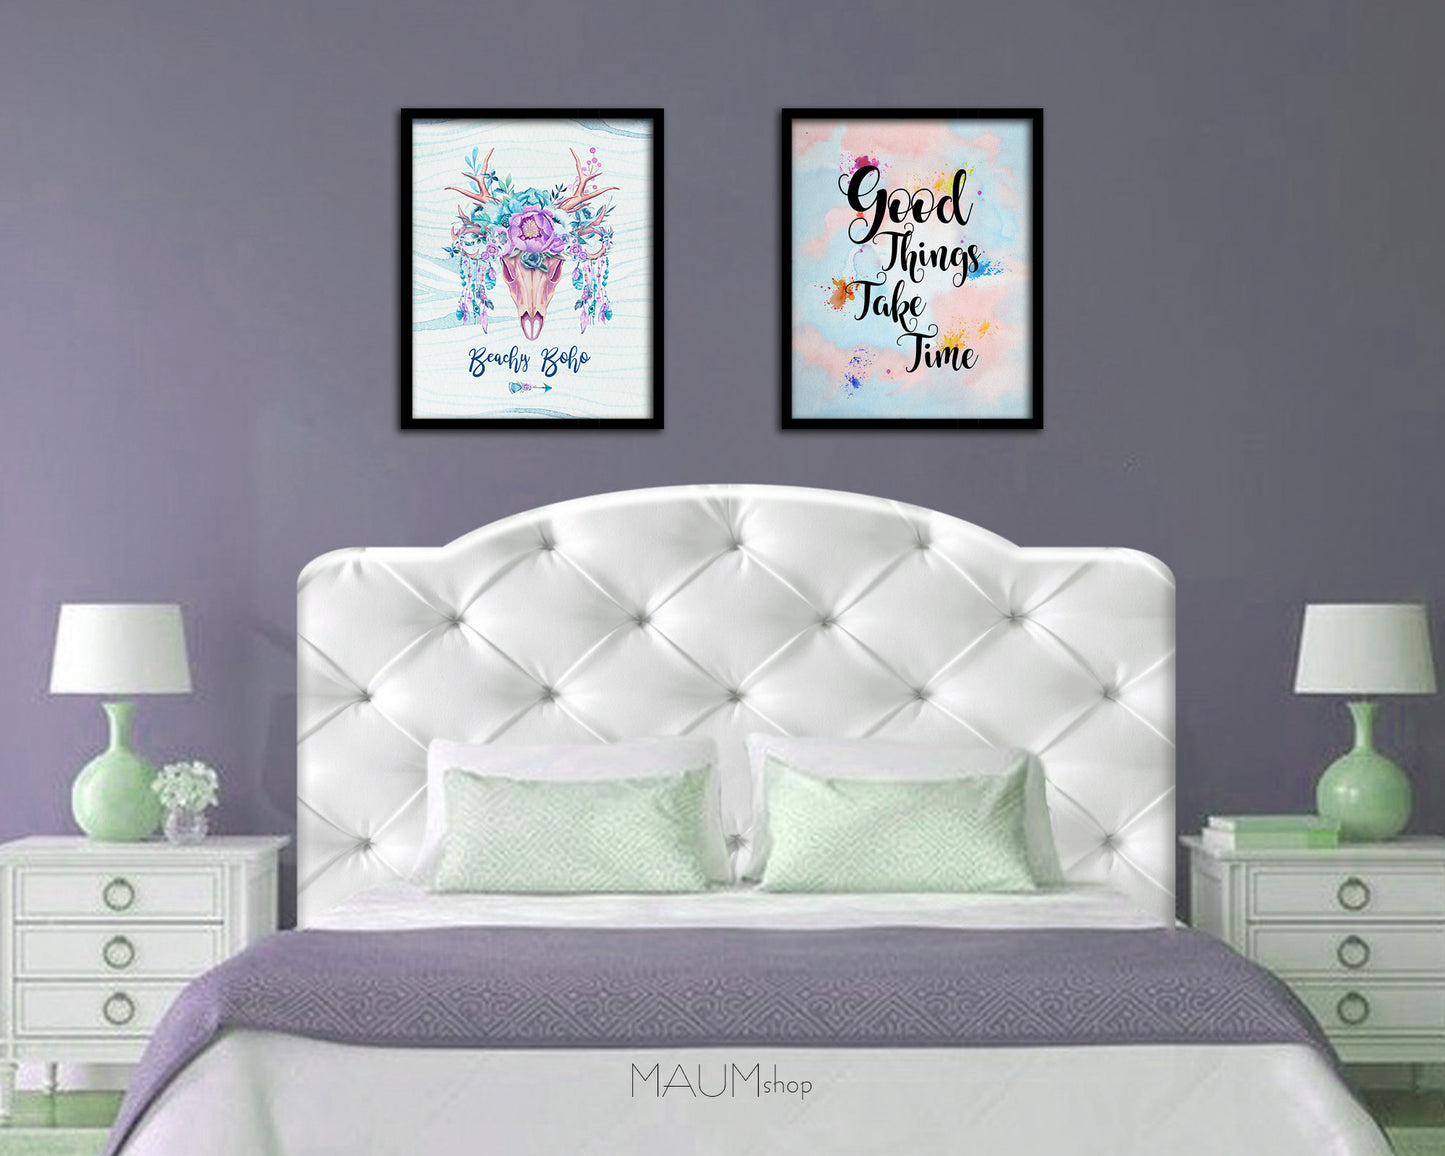 Good things take time Quote Framed Print Wall Decor Art Gifts